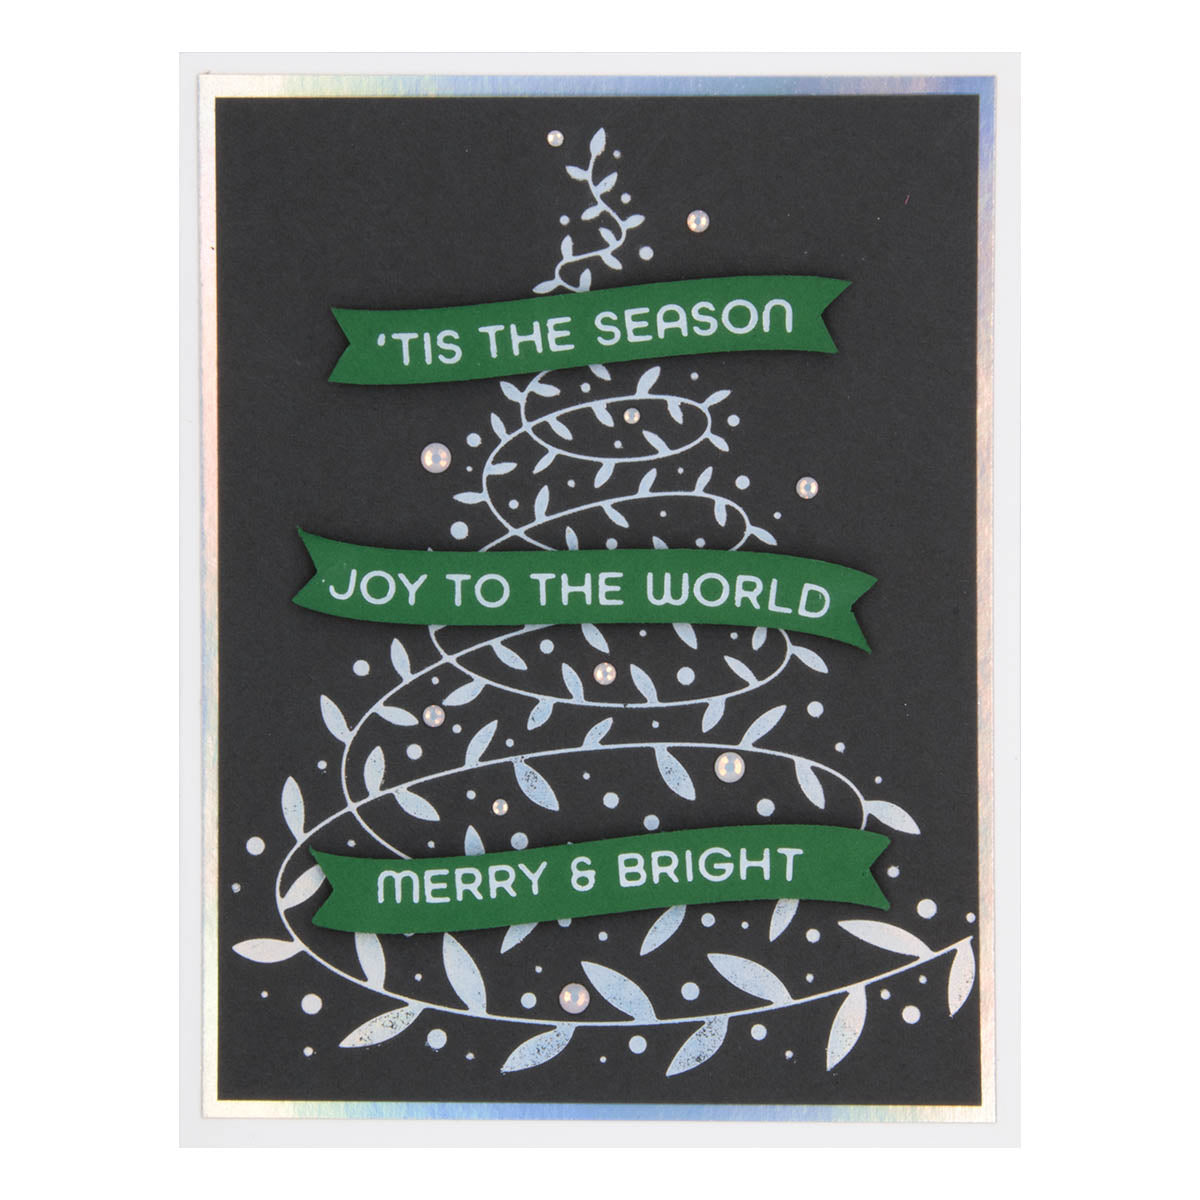 Comfort & Joy Sentiments Hot Foil Plate & Die Set from the Glimmer for the Holidays Collection